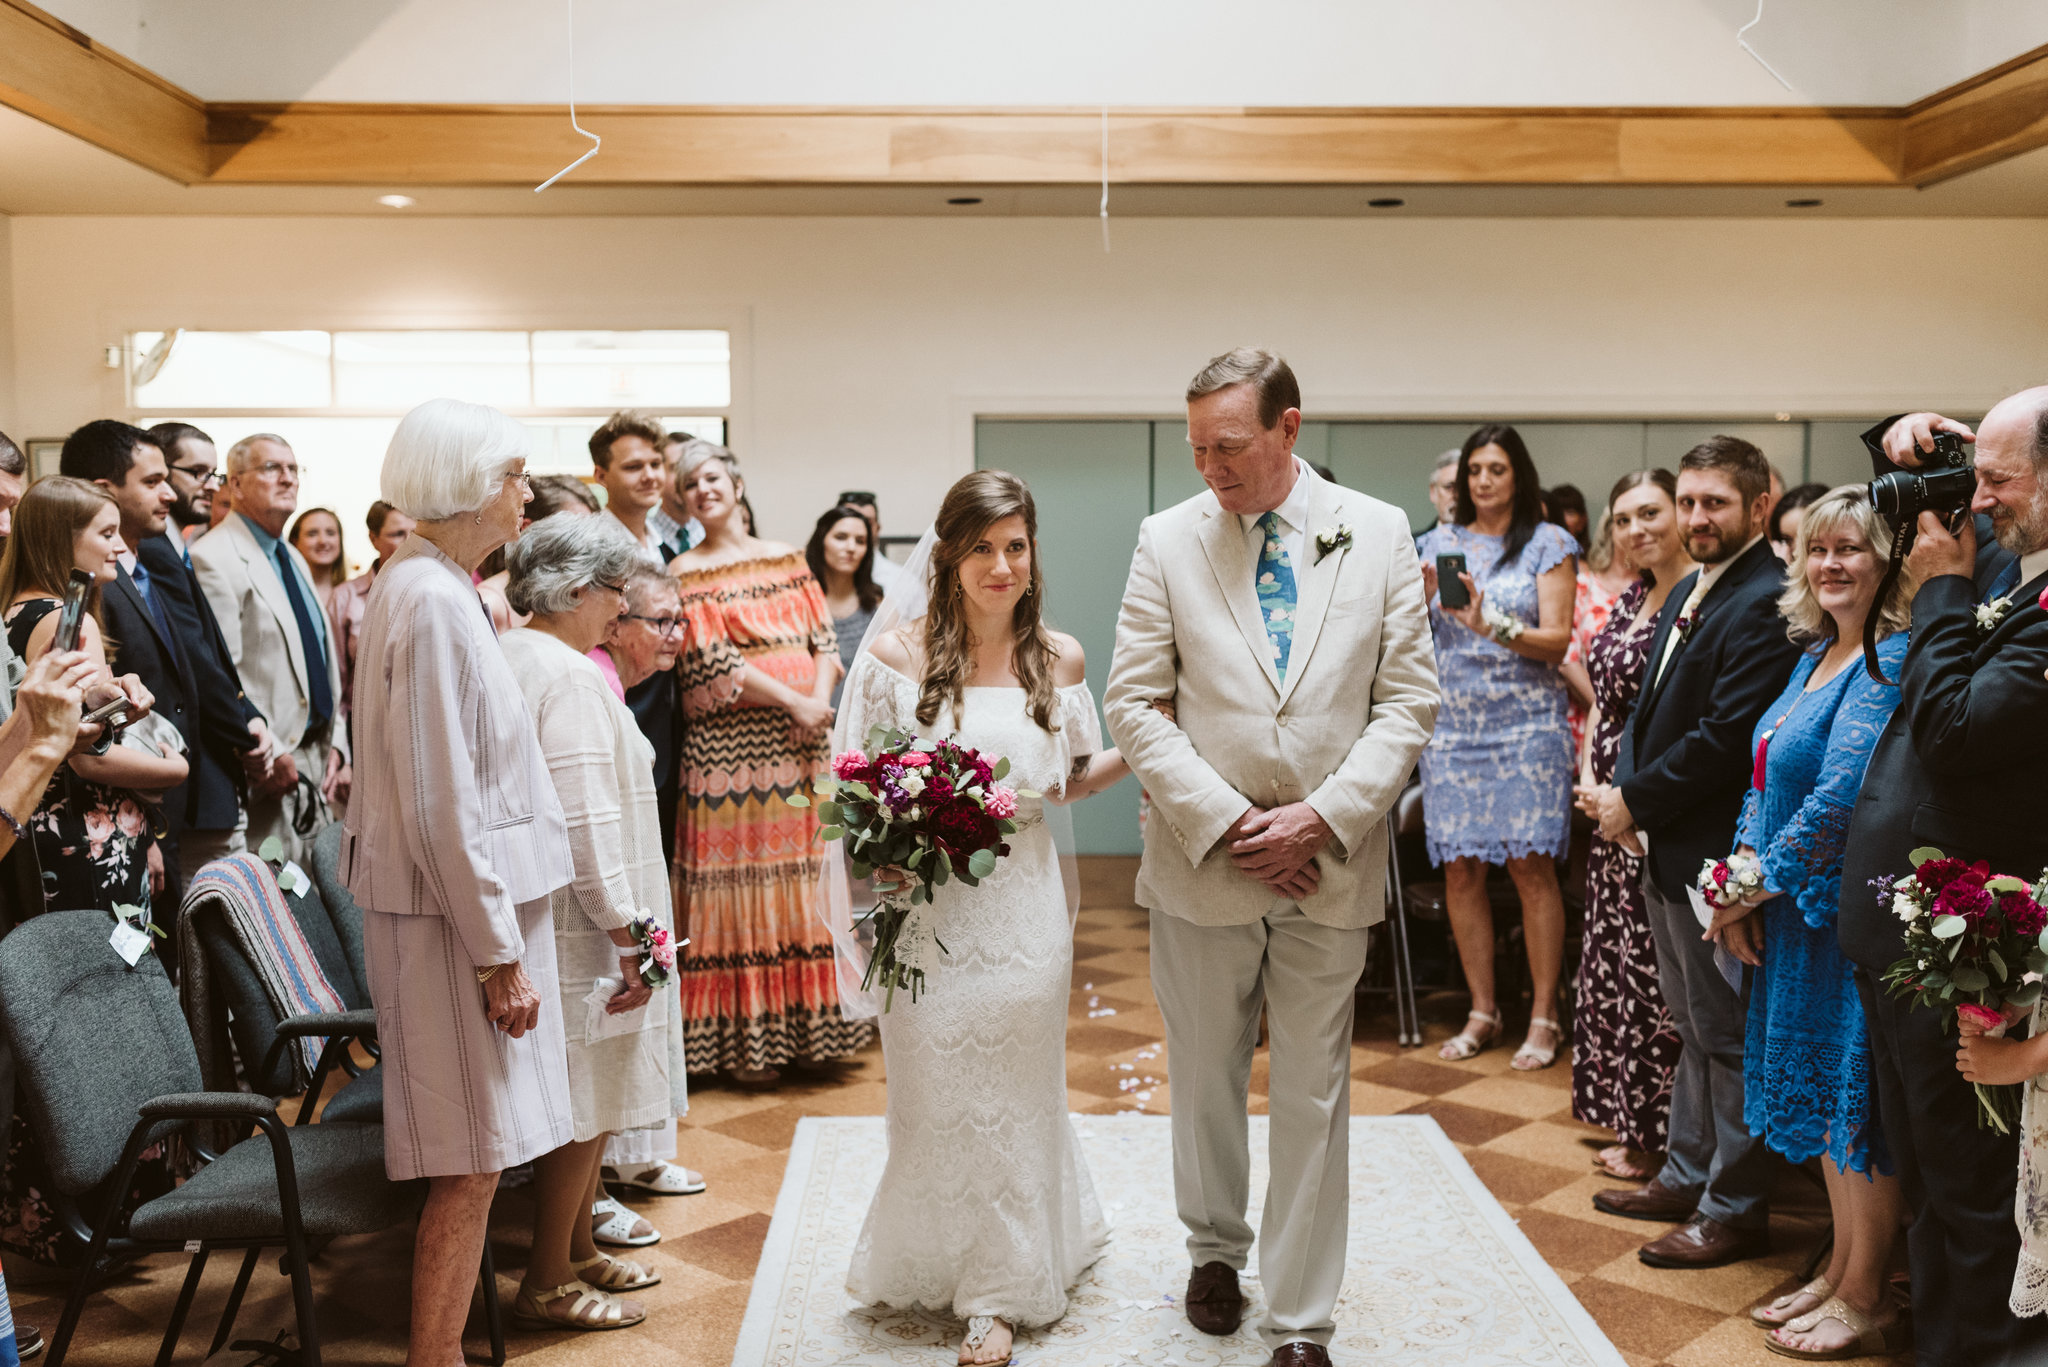  Annapolis, Quaker Wedding, Maryland Wedding Photographer, Intimate, Small Wedding, Vintage, DIY, Bride Walking Down Aisle with Father, Wedding Guests Standing during Ceremony 